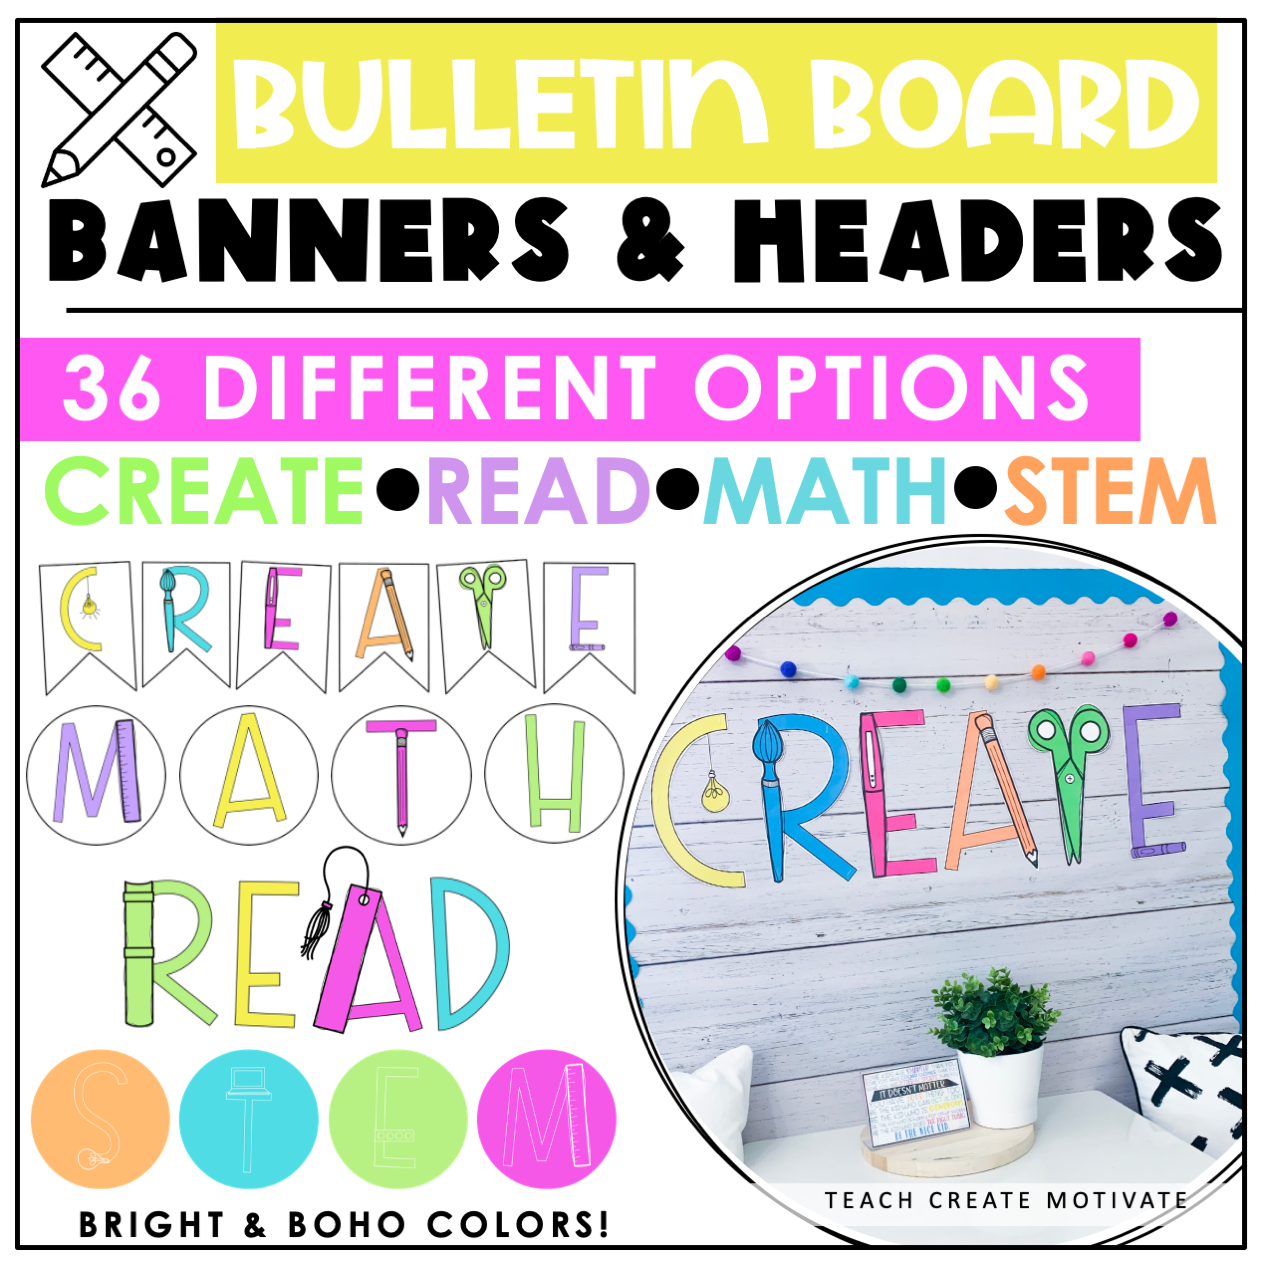 How to Use Bulletin Board Letters in Your Classroom - Ashley